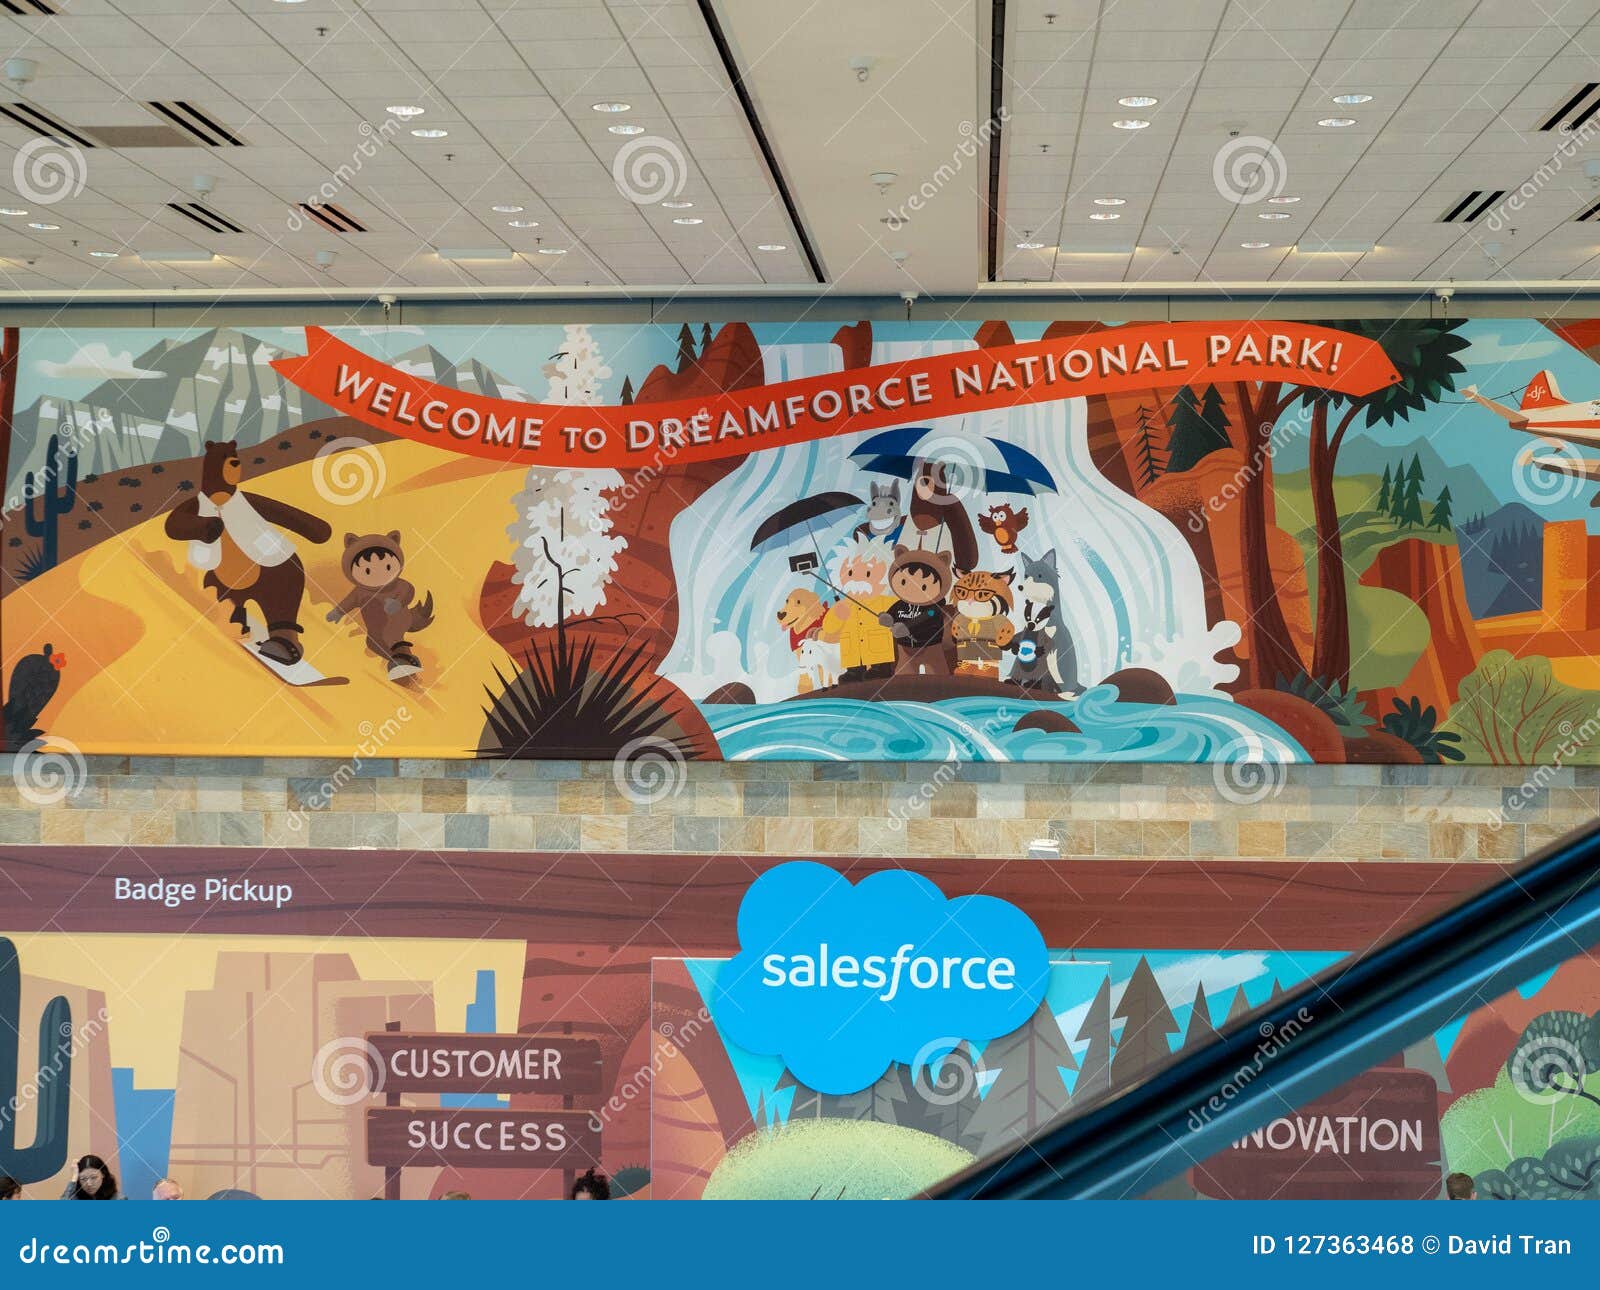 To Dreamforce National Park Posted with Salesforce Logo at